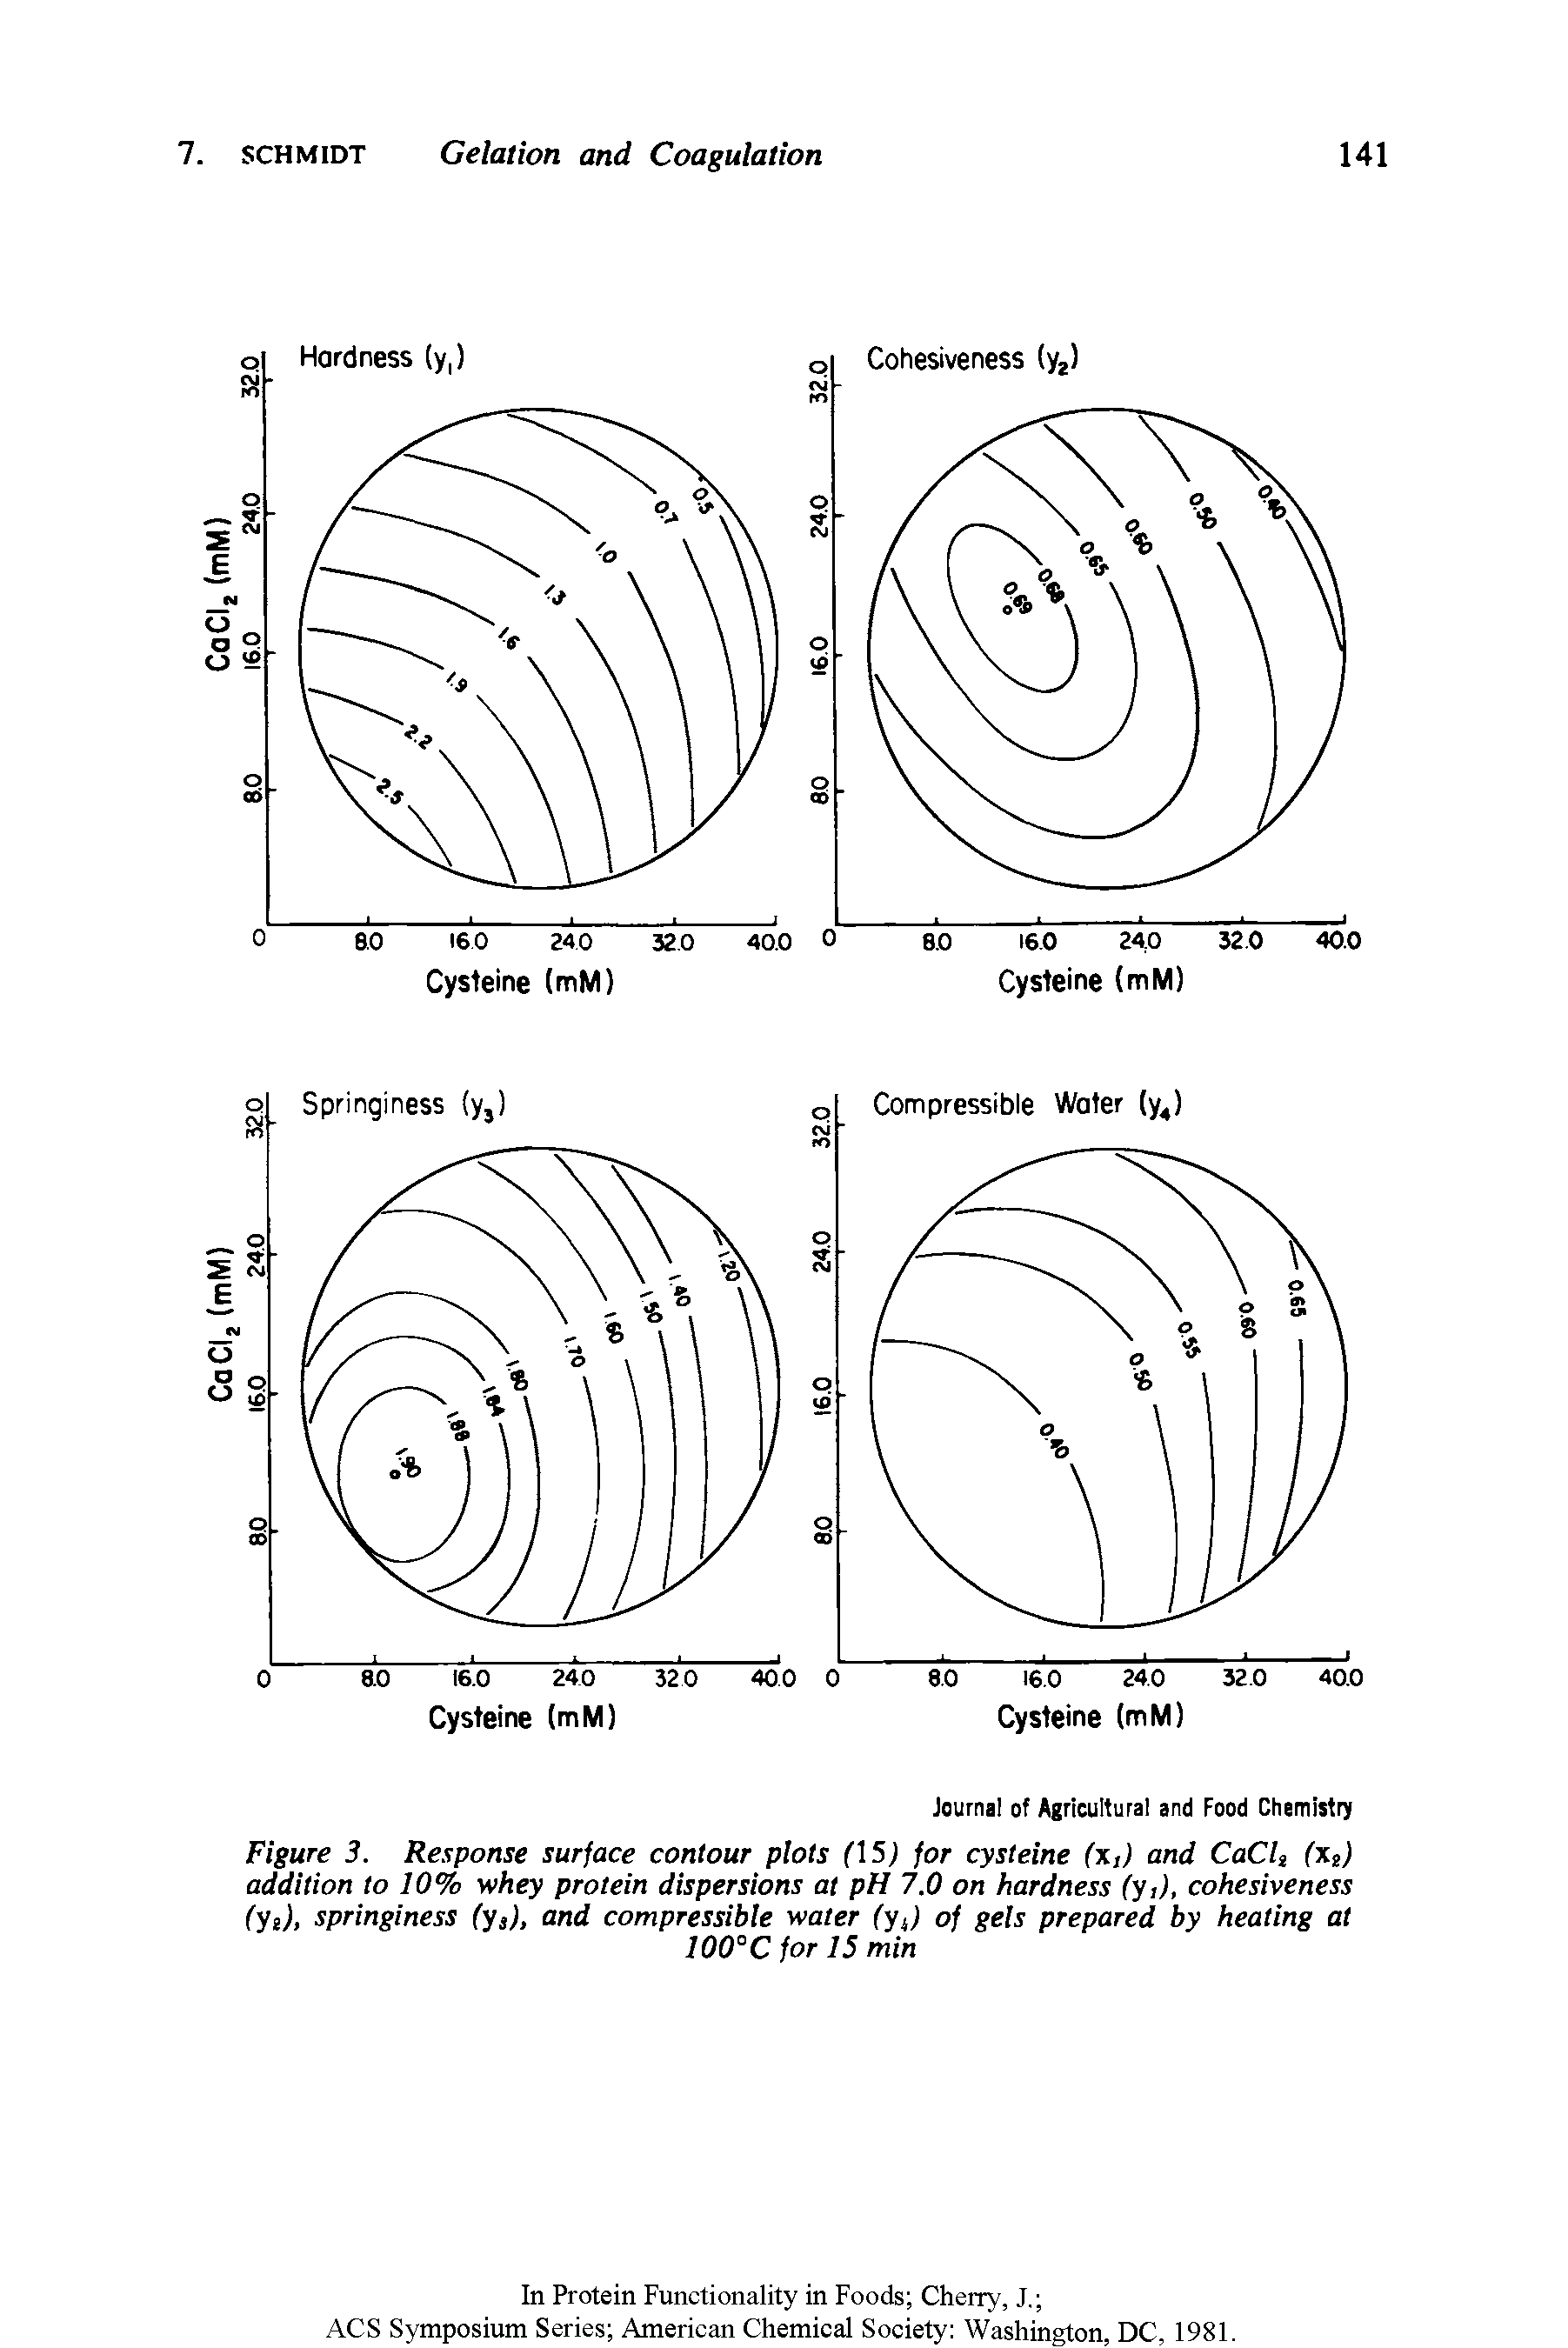 Figure 3. Response surface contour plots (15) for cysteine (x,) and CaCh (Xi) addition to 10% whey protein dispersions at pH 7.0 on hardness (y,), cohesiveness (yi), springiness (ys), and compressible water (yj of gels prepared by heating at 100°C for 15 min...